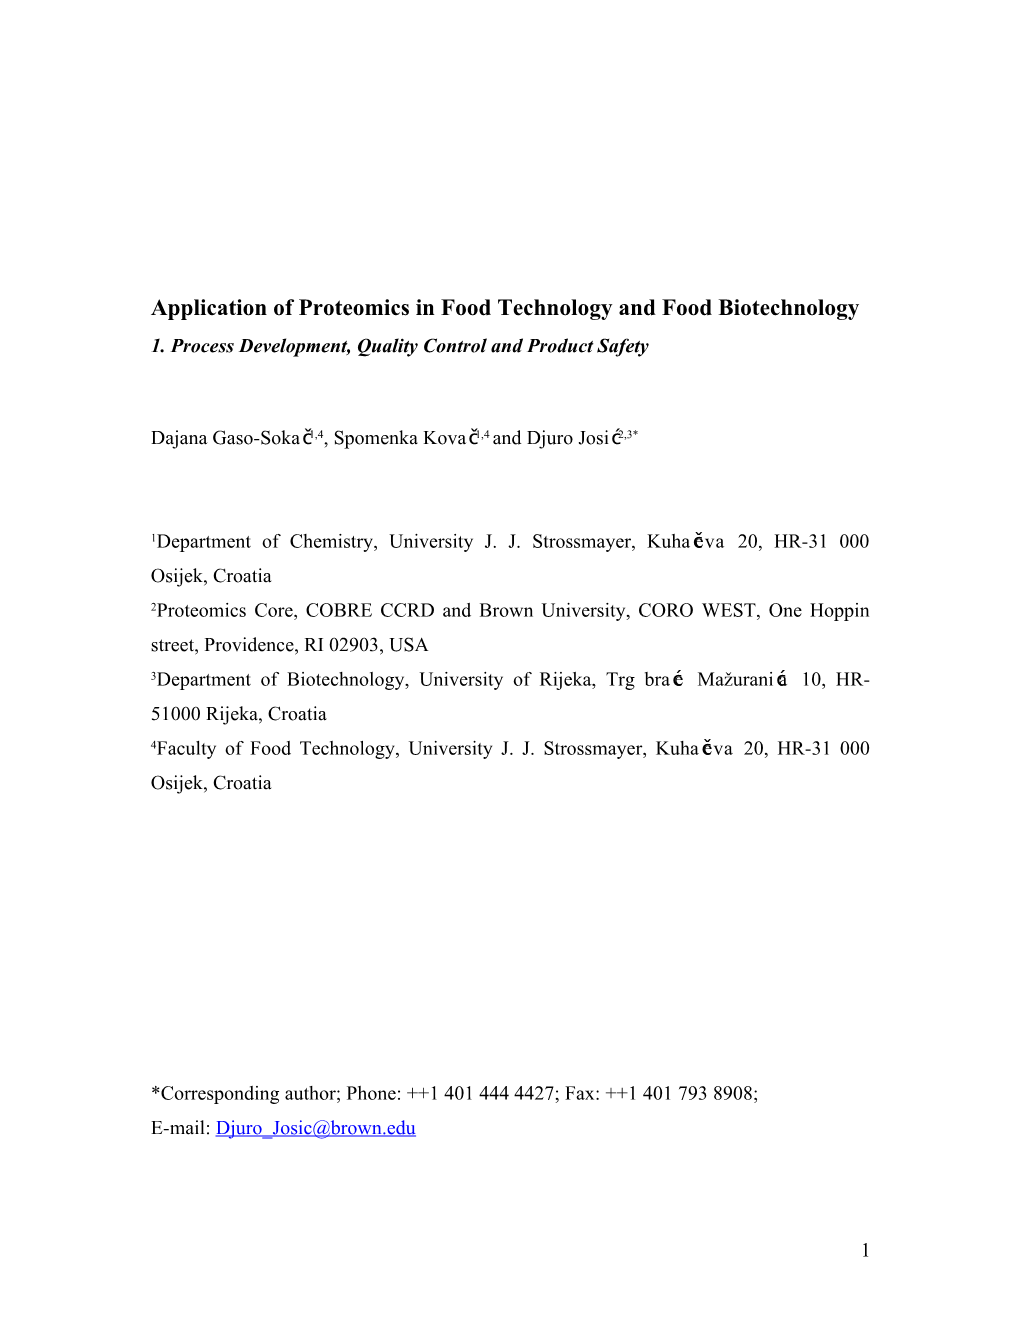 Application of Proteomics in Food Technology and Biotechnology